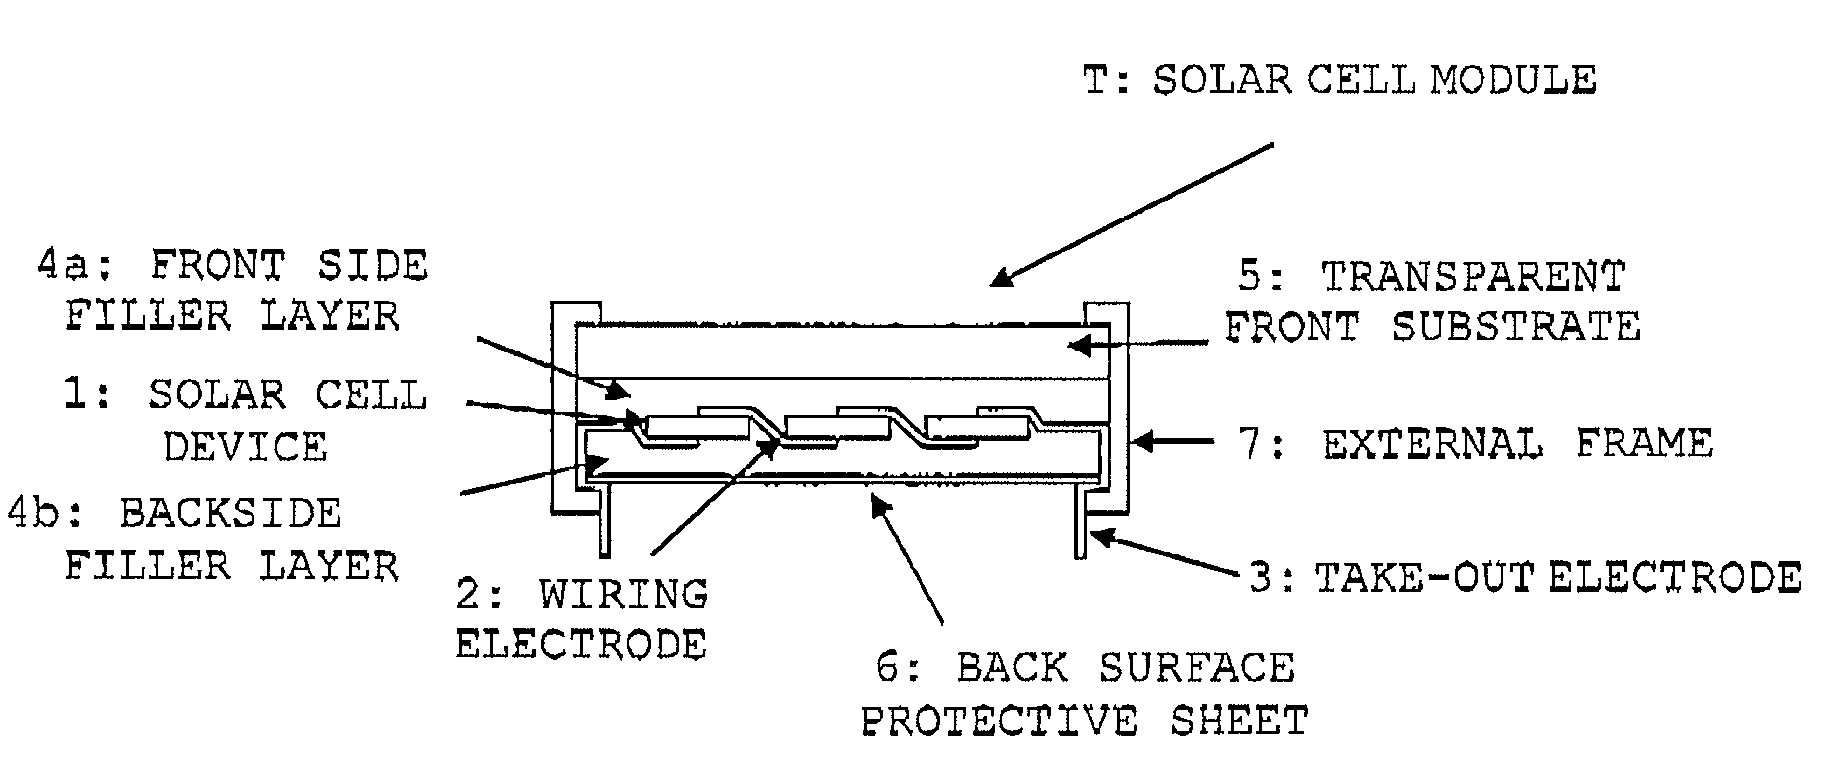 Encapsulant for photovoltaic module, photovoltaic module using same and production method of photovoltaic module